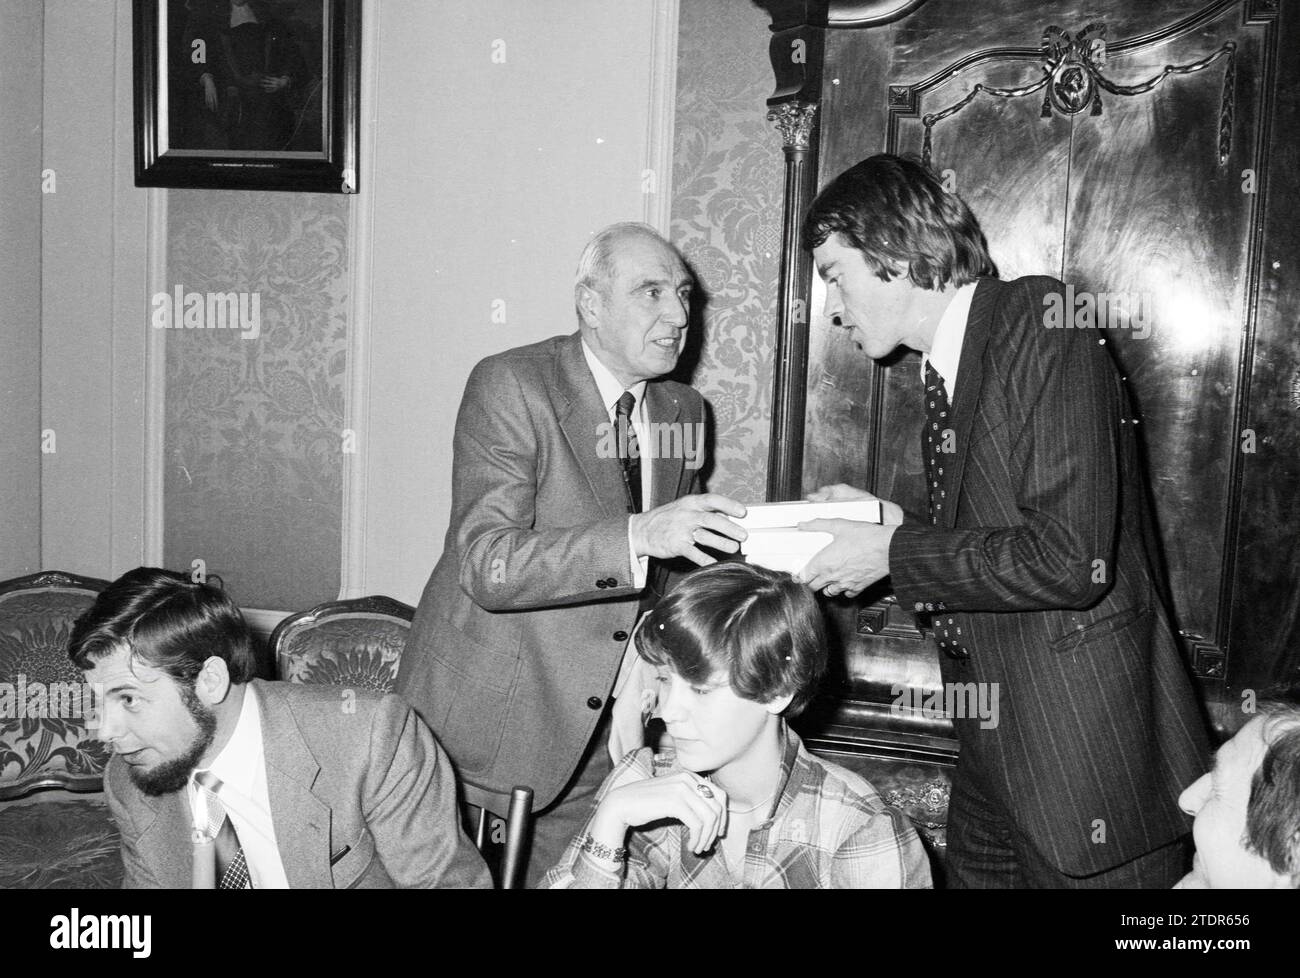 Dinner, Whizgle News from the Past, Tailored for the Future. Explore historical narratives, Dutch The Netherlands agency image with a modern perspective, bridging the gap between yesterday's events and tomorrow's insights. A timeless journey shaping the stories that shape our future Stock Photo